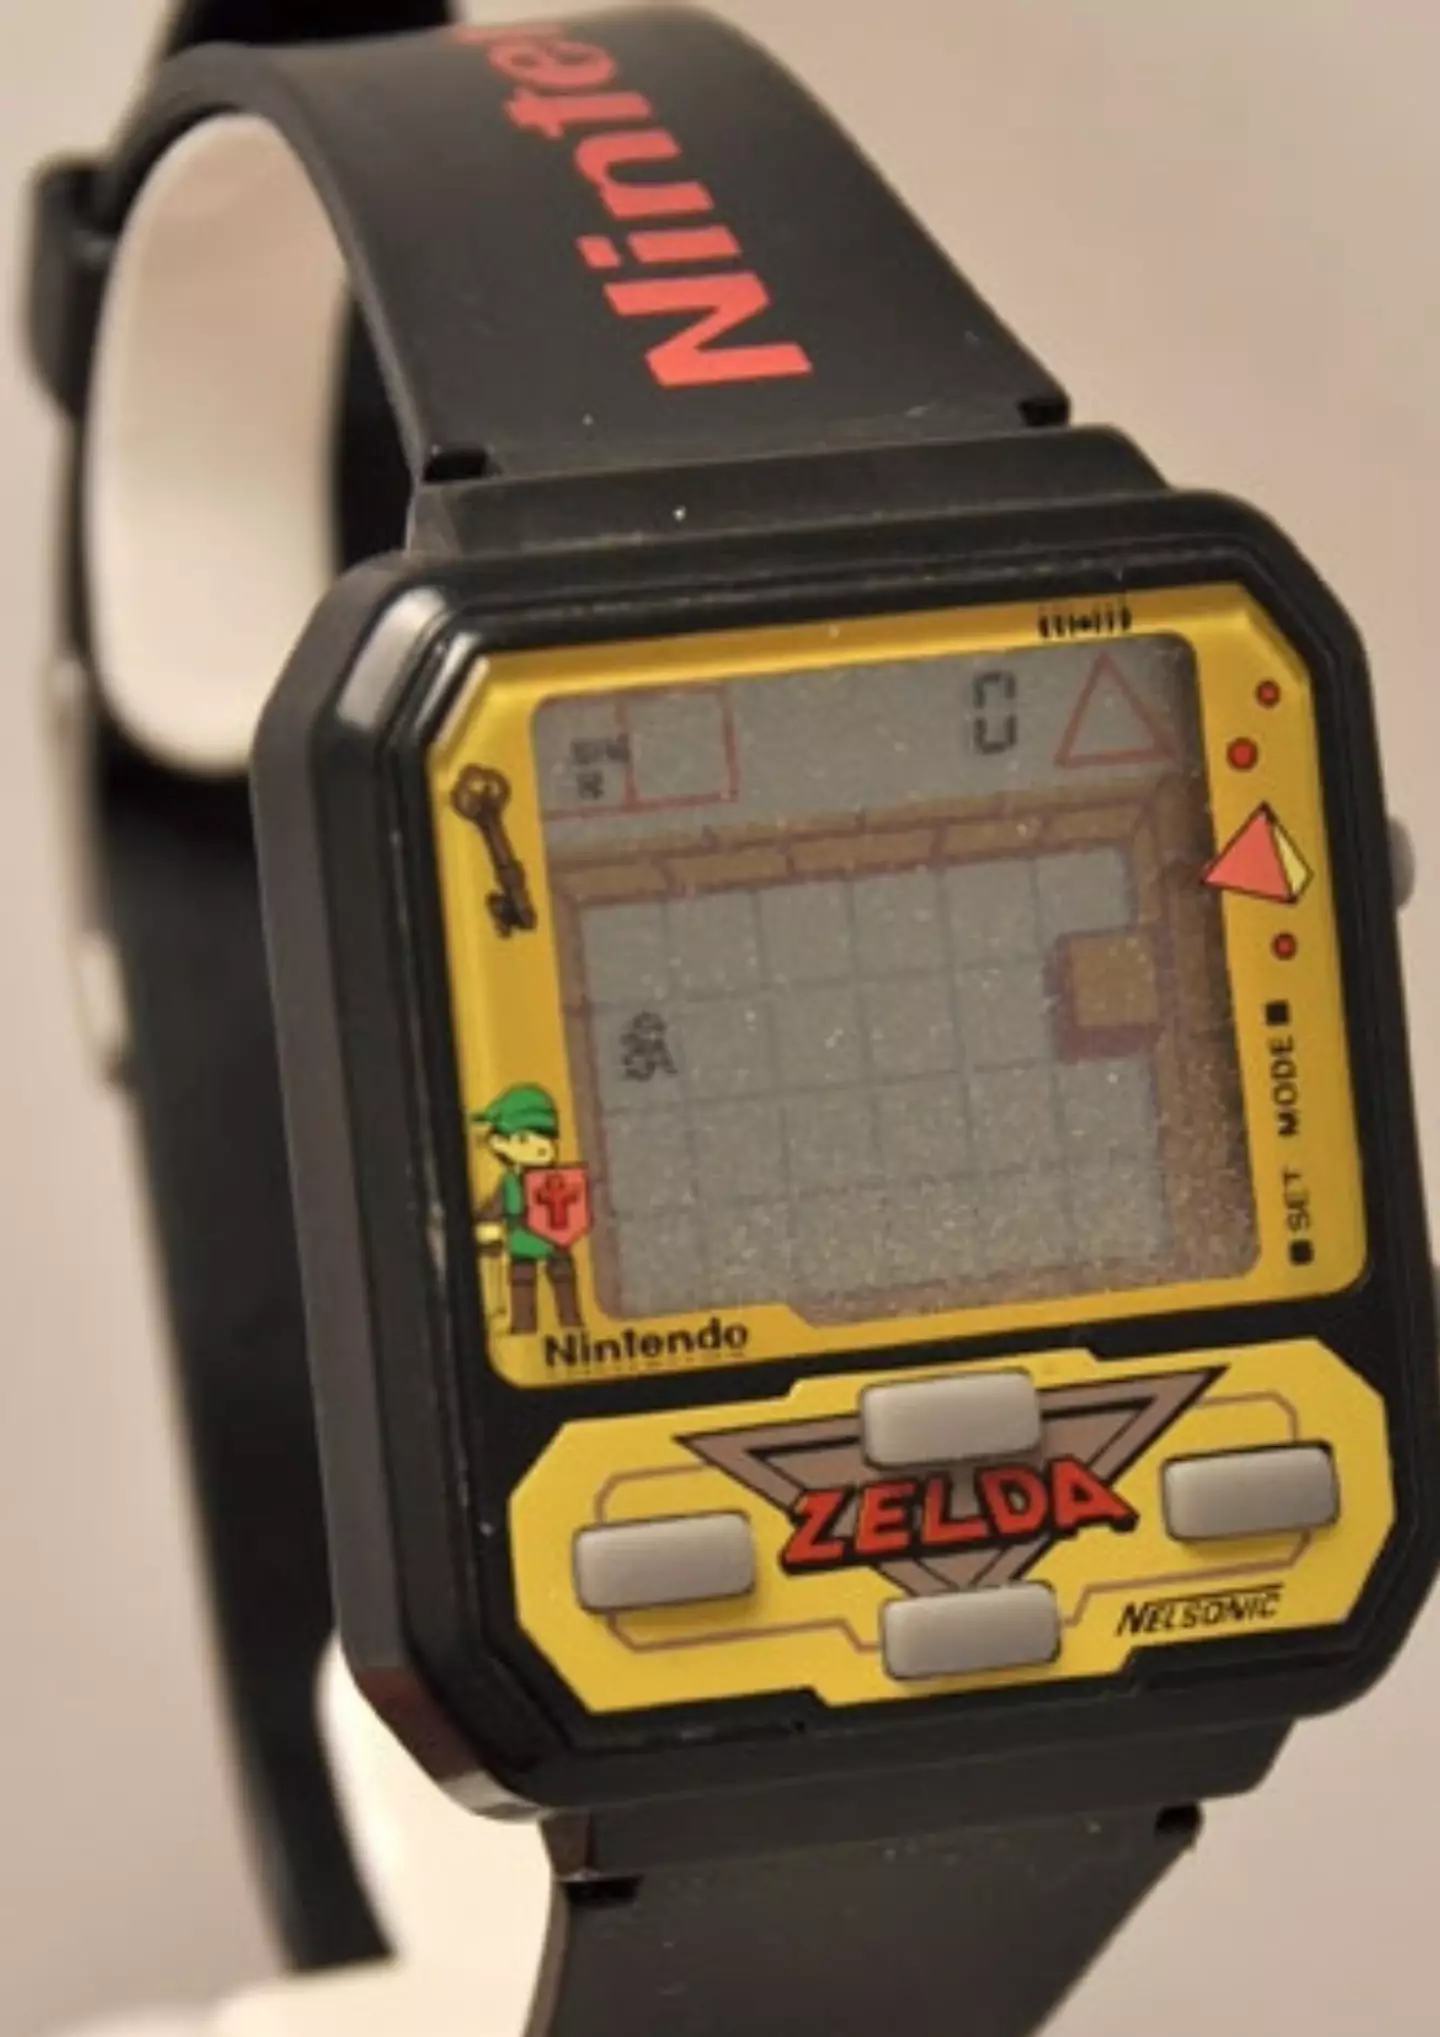 Game Watches were all the rage back in the 1980s.